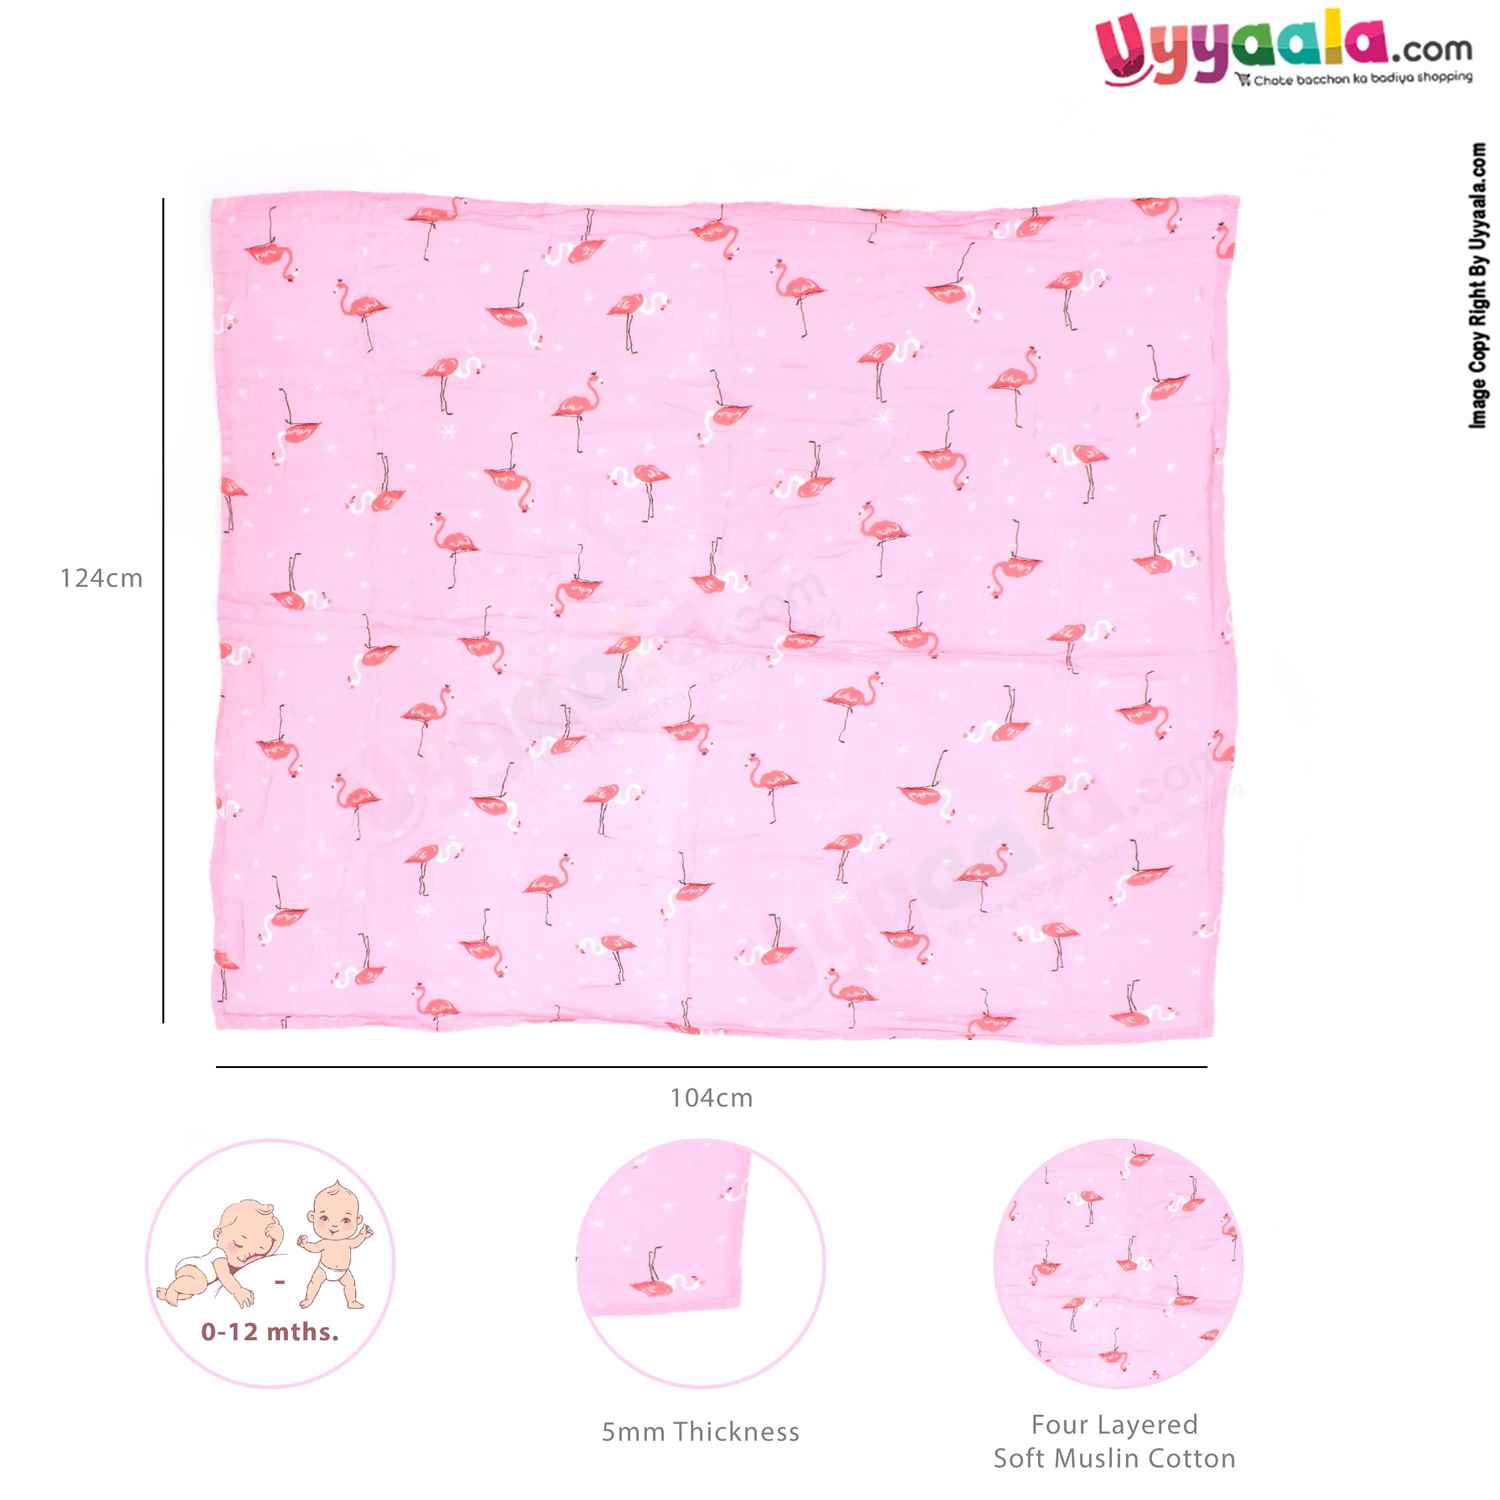 Muslin Swaddle Wrapper with Crane Bird Print for Babies 0-12m Age, Size(124*104cm)- Pink